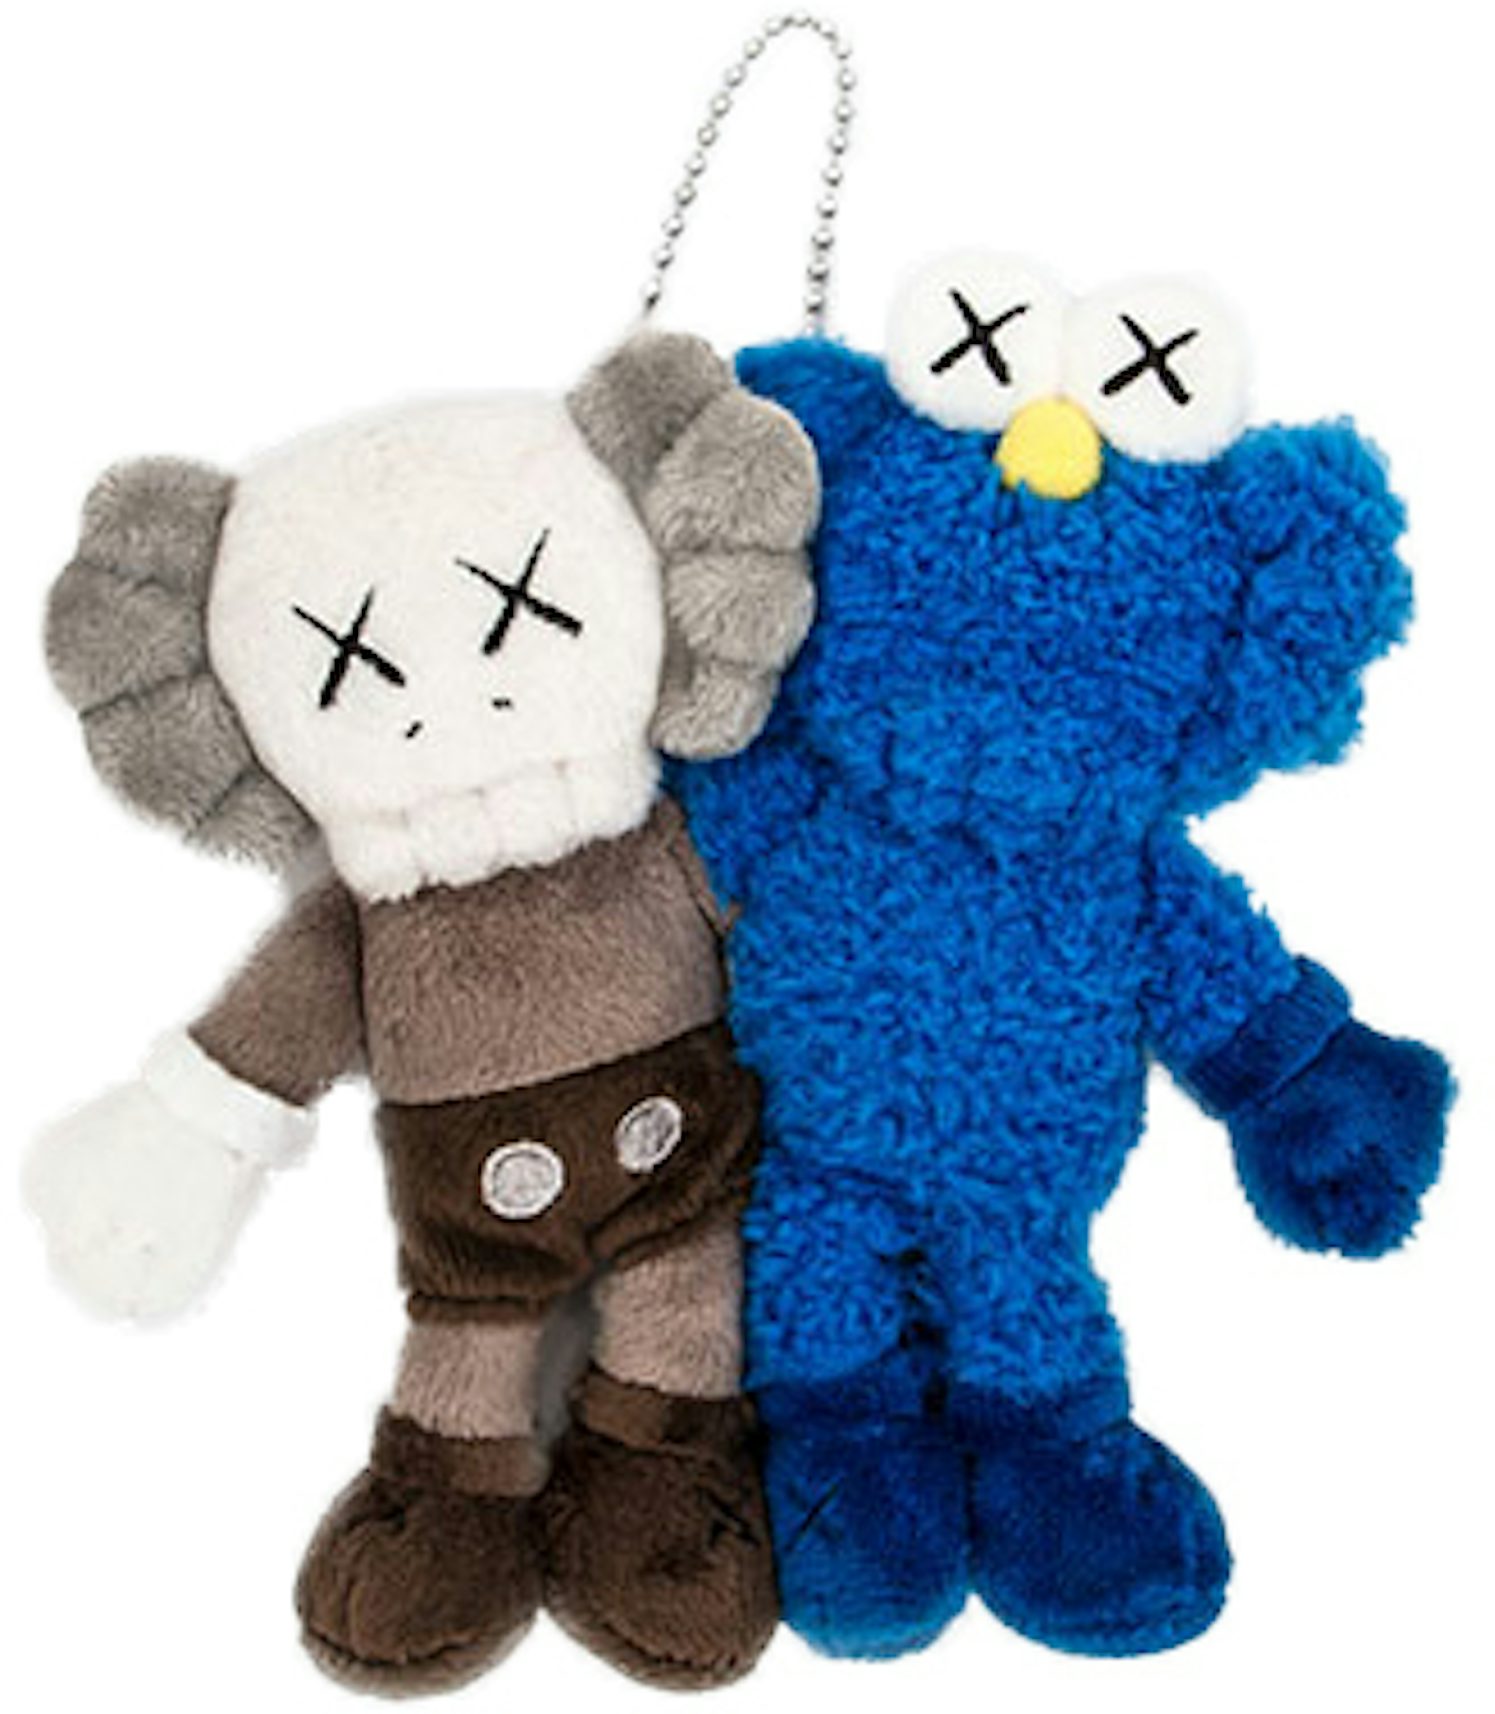 https://images.stockx.com/images/Kaws-Seeing-Watching-Plush-Doll-Keychain-Grey-Blue.jpg?fit=fill&bg=FFFFFF&w=1200&h=857&fm=jpg&auto=compress&dpr=2&trim=color&updated_at=1614778698&q=60